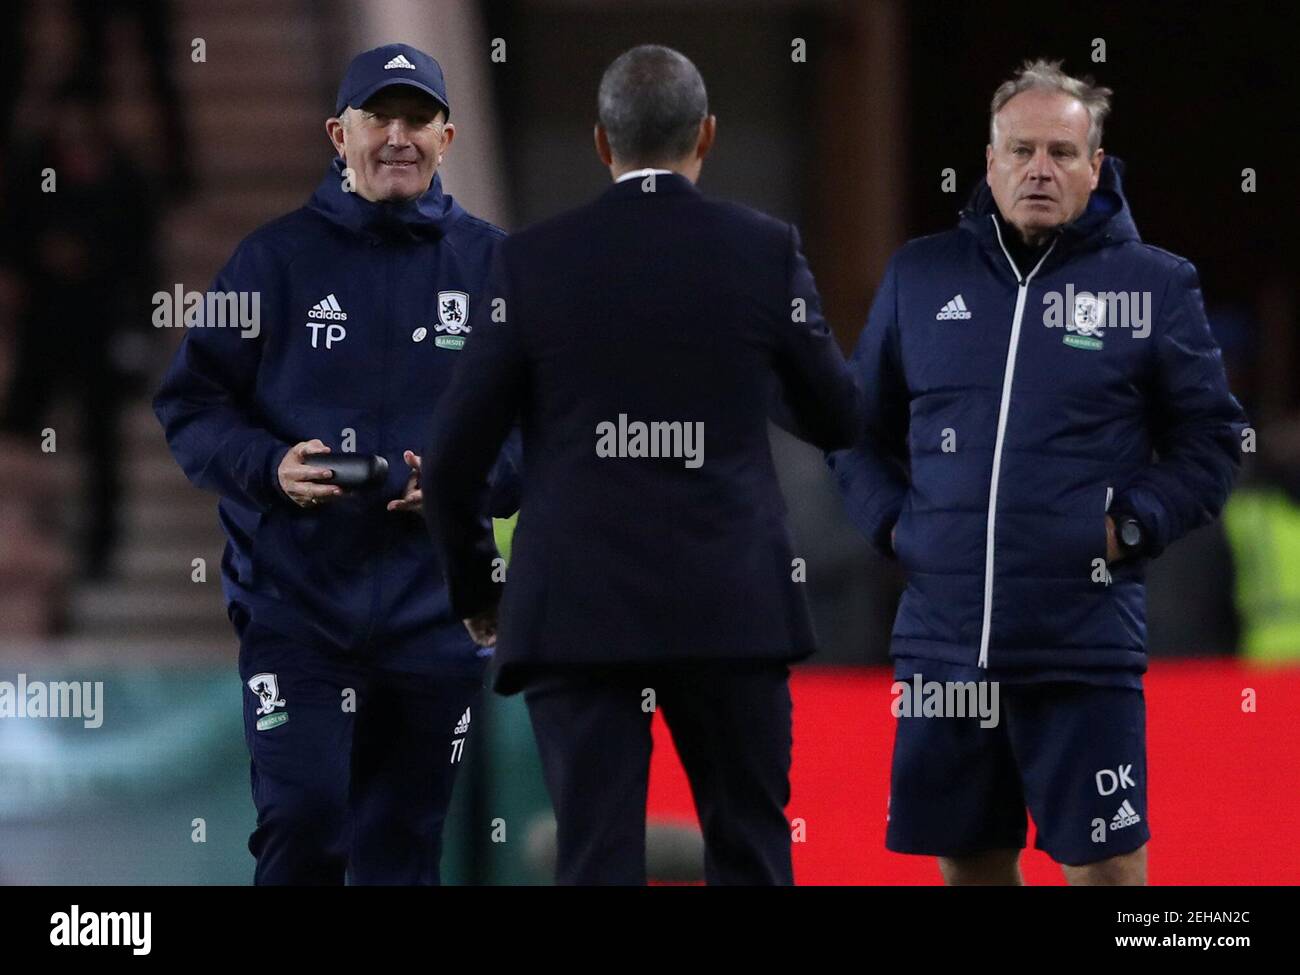 Soccer Football - FA Cup Fourth Round - Middlesbrough vs Brighton & Hove Albion - Riverside Stadium, Middlesbrough, Britain - January 27, 2018   Middlesbrough manager Tony Pulis and Brighton manager Chris Hughton after the match   REUTERS/Scott Heppell Stock Photo